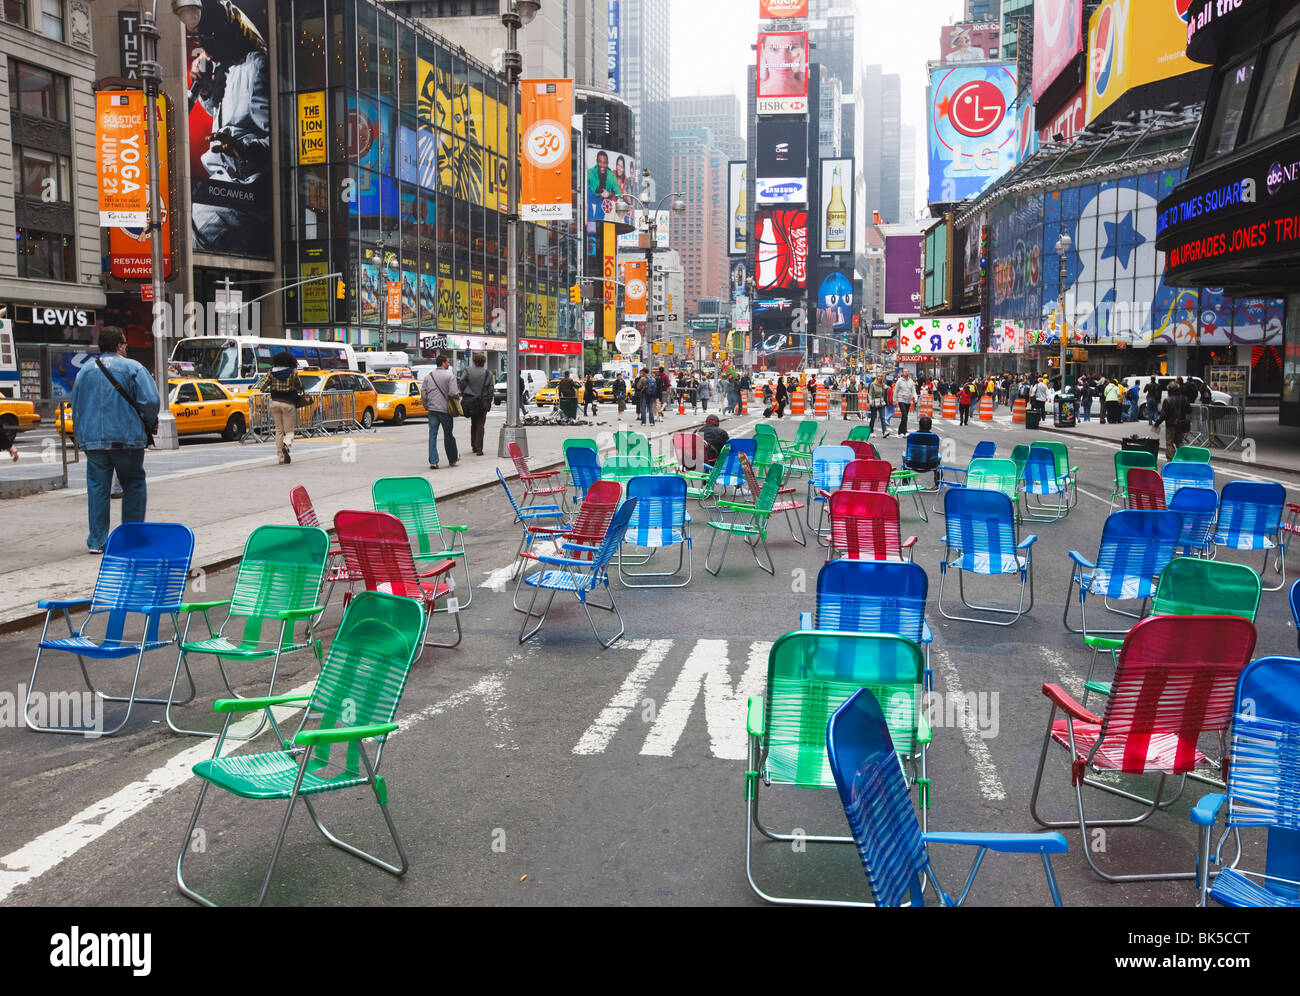 Garden chairs in the road for the public to sit in the pedestrian zone of Times Square, NYC Stock Photo